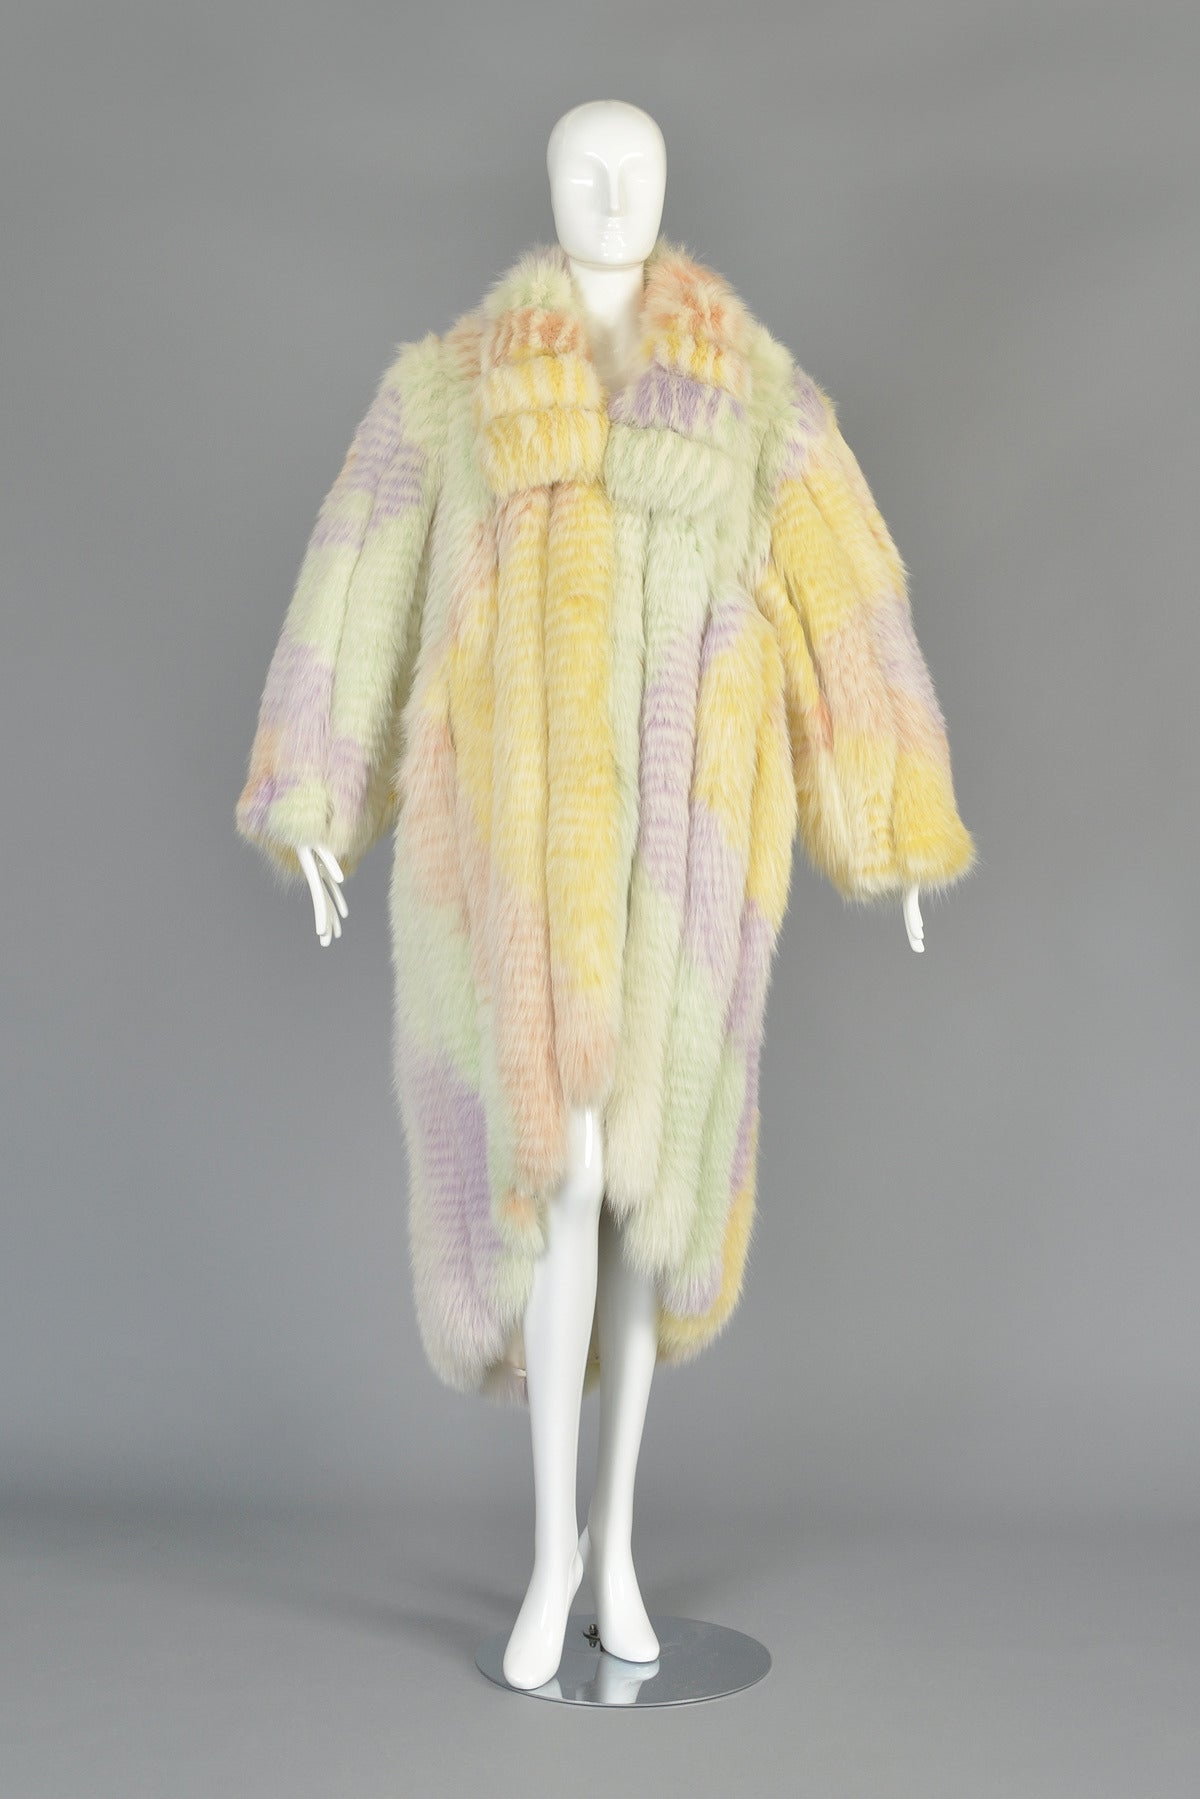 Just reduced from $4800 to $2500

Seriously amazing 1980s rainbow fox fur coat. INCREDIBLE, incredible, one-of-a-kind find. Ultra thick and plush dyed fox fur in a myriad of pastels. Oversized collar. Ultra wide, thick pelts are vertically laid